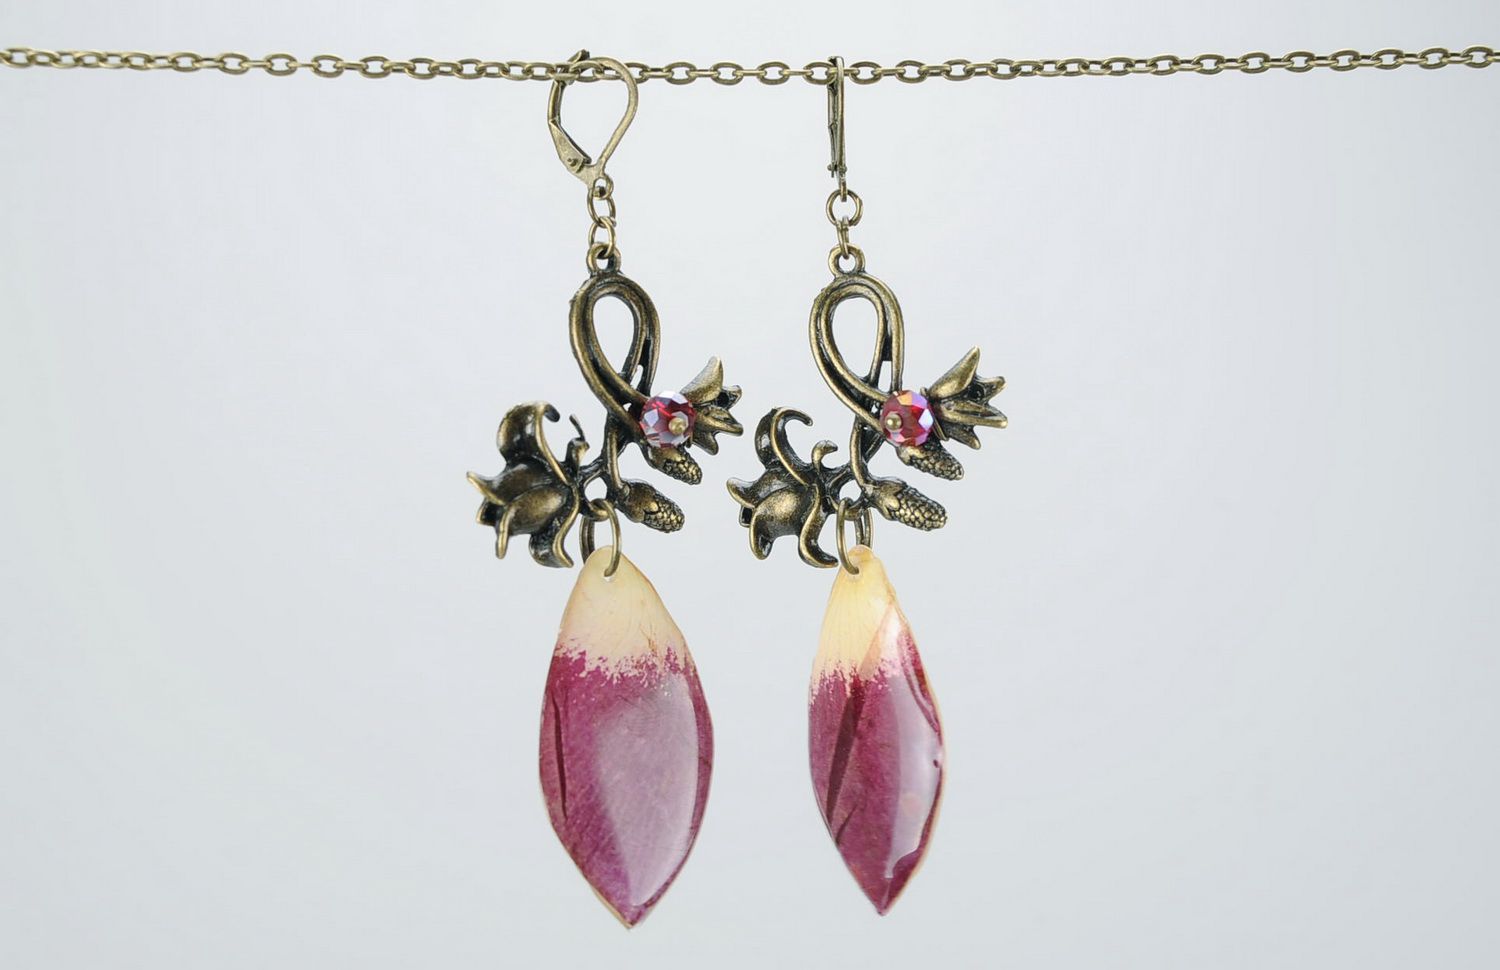 Earrings made from rose petals photo 2